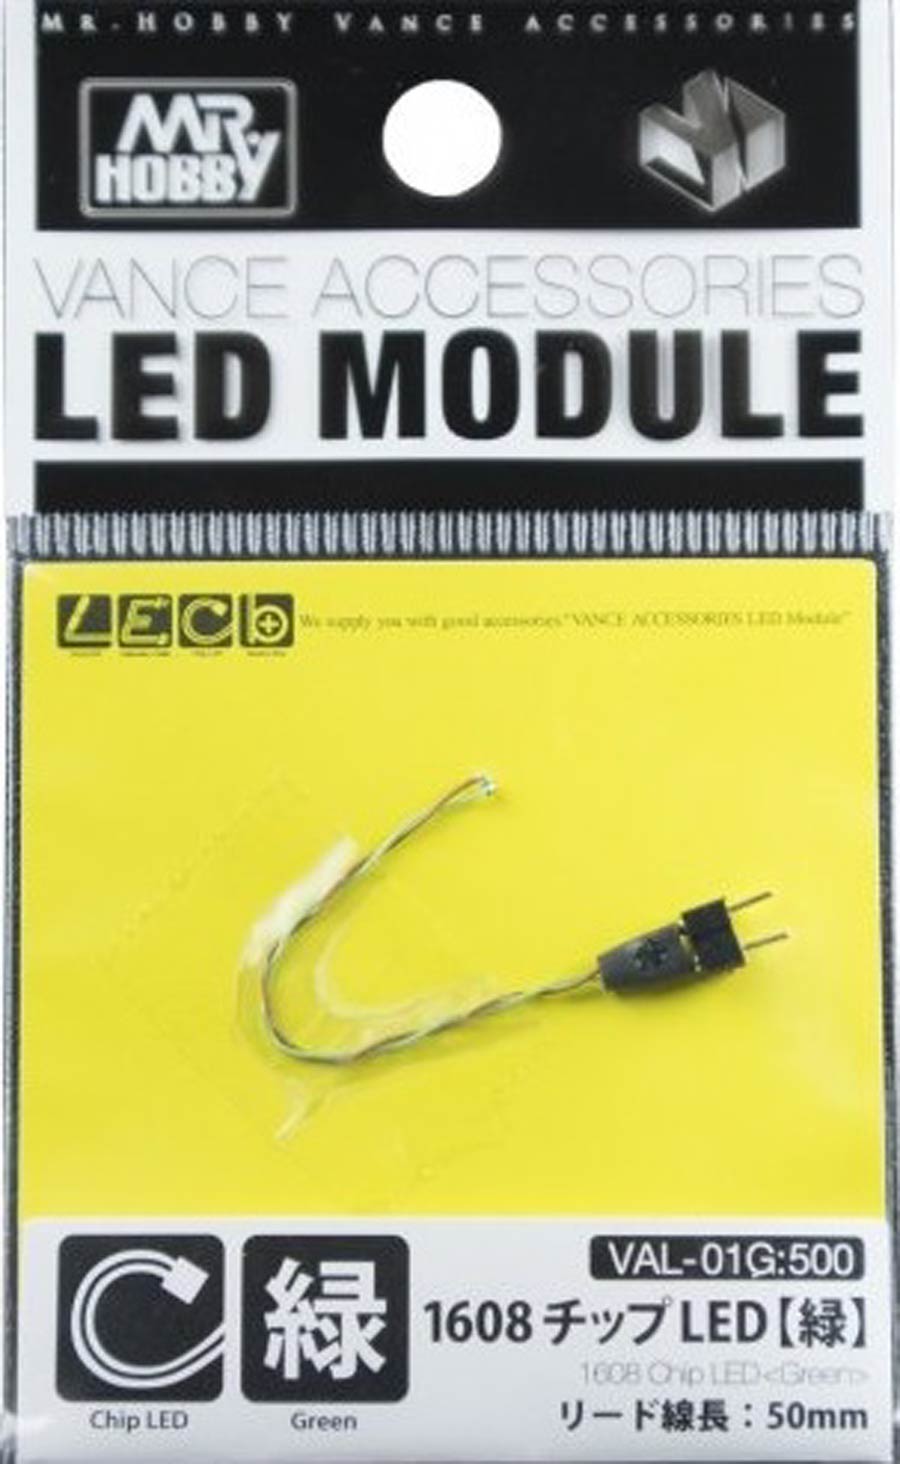 Mr. Hobby Vance Accessories LED Module - 1608 Chip LED (Green)